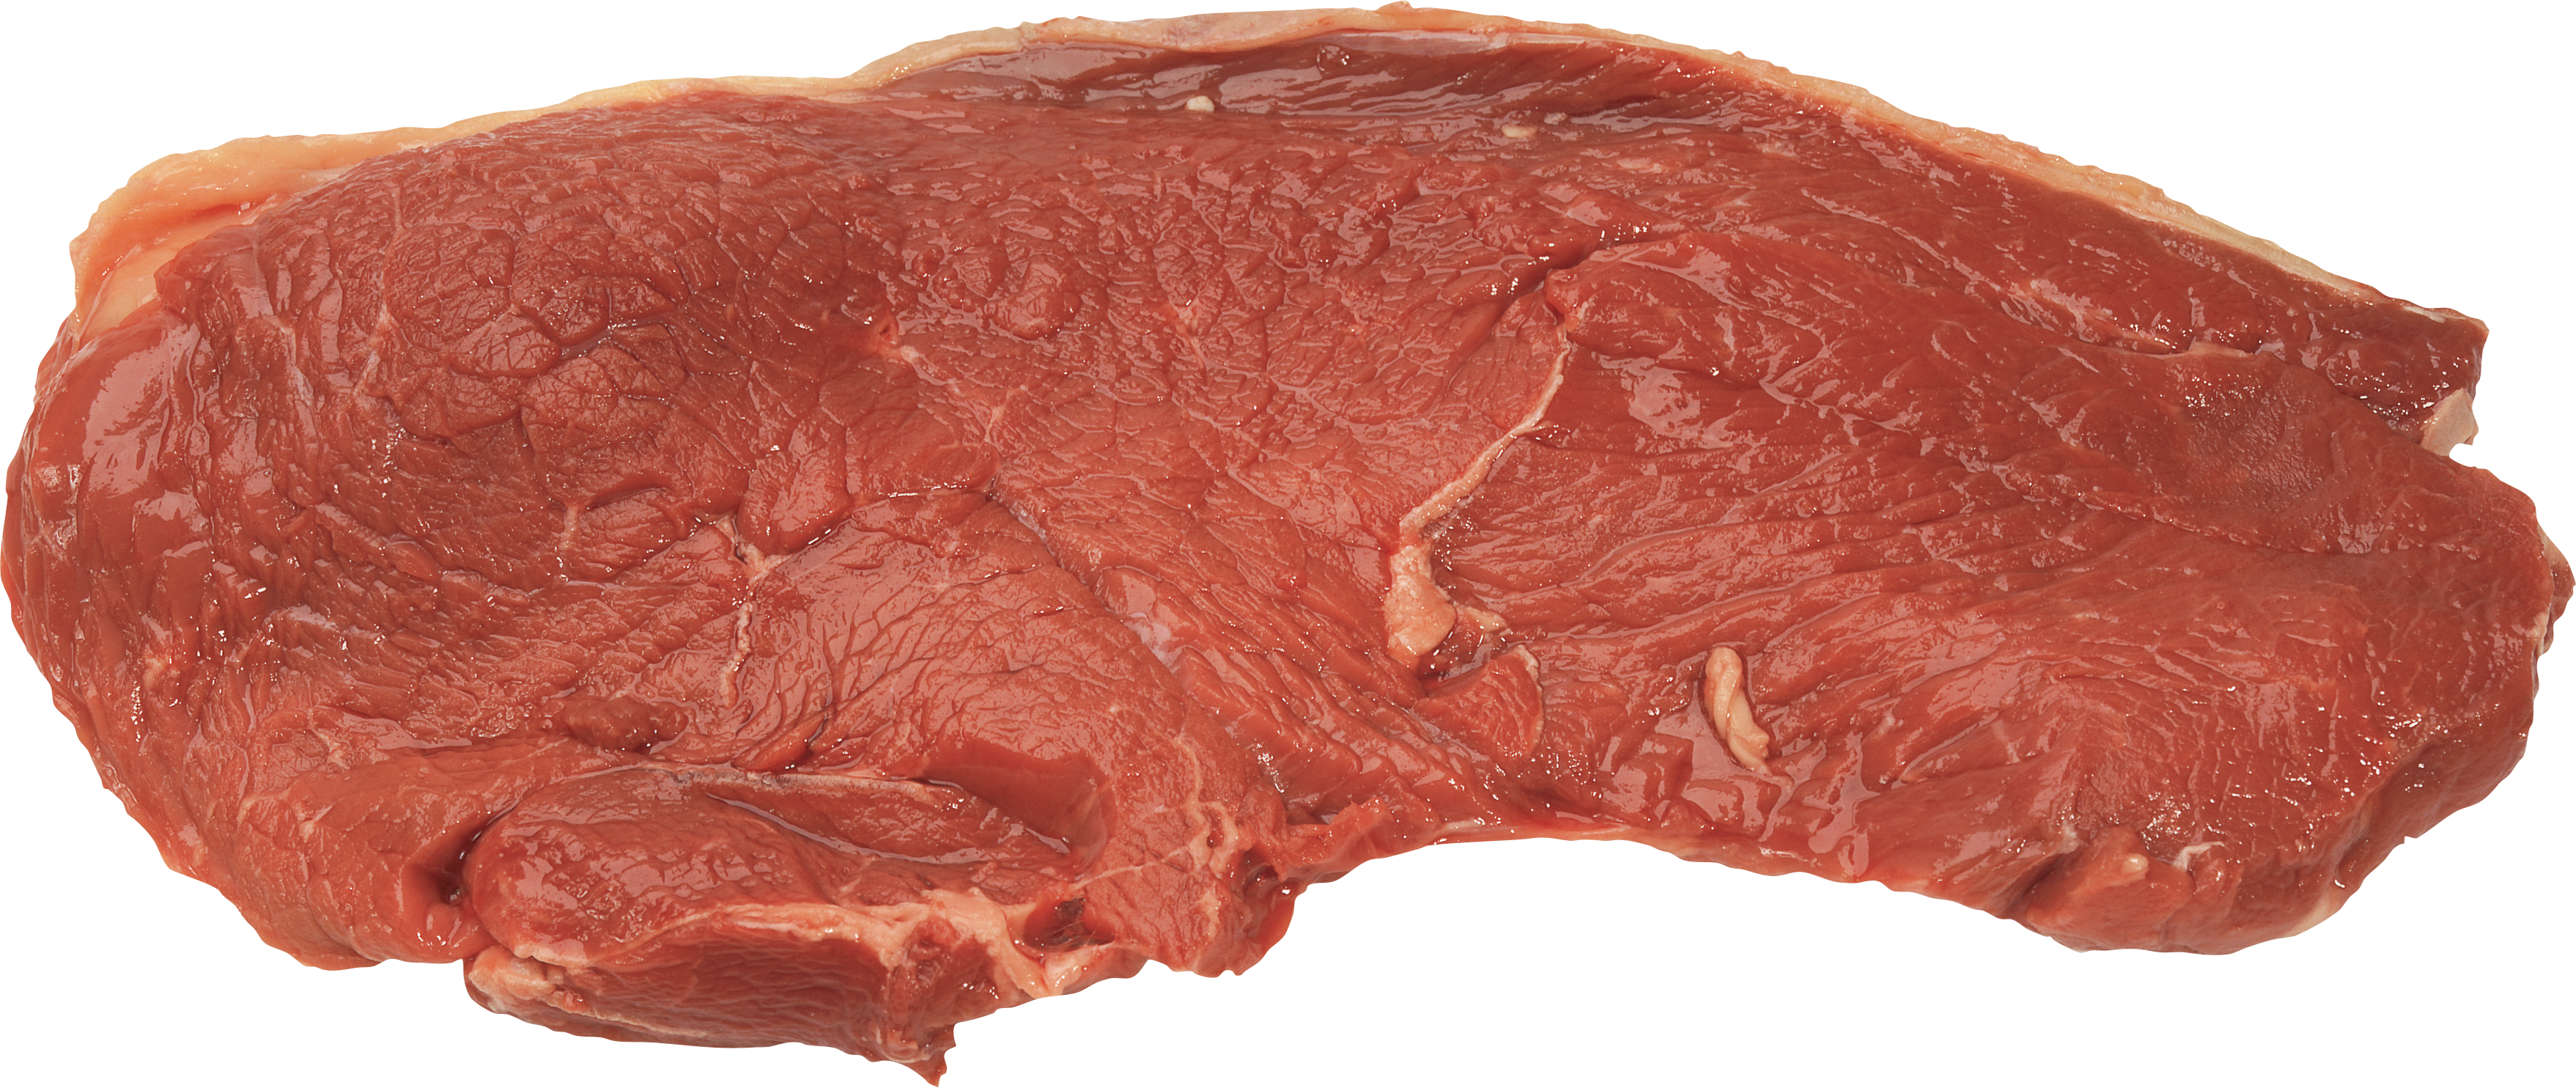 Meat clipart sandwich meat. Forty one isolated stock